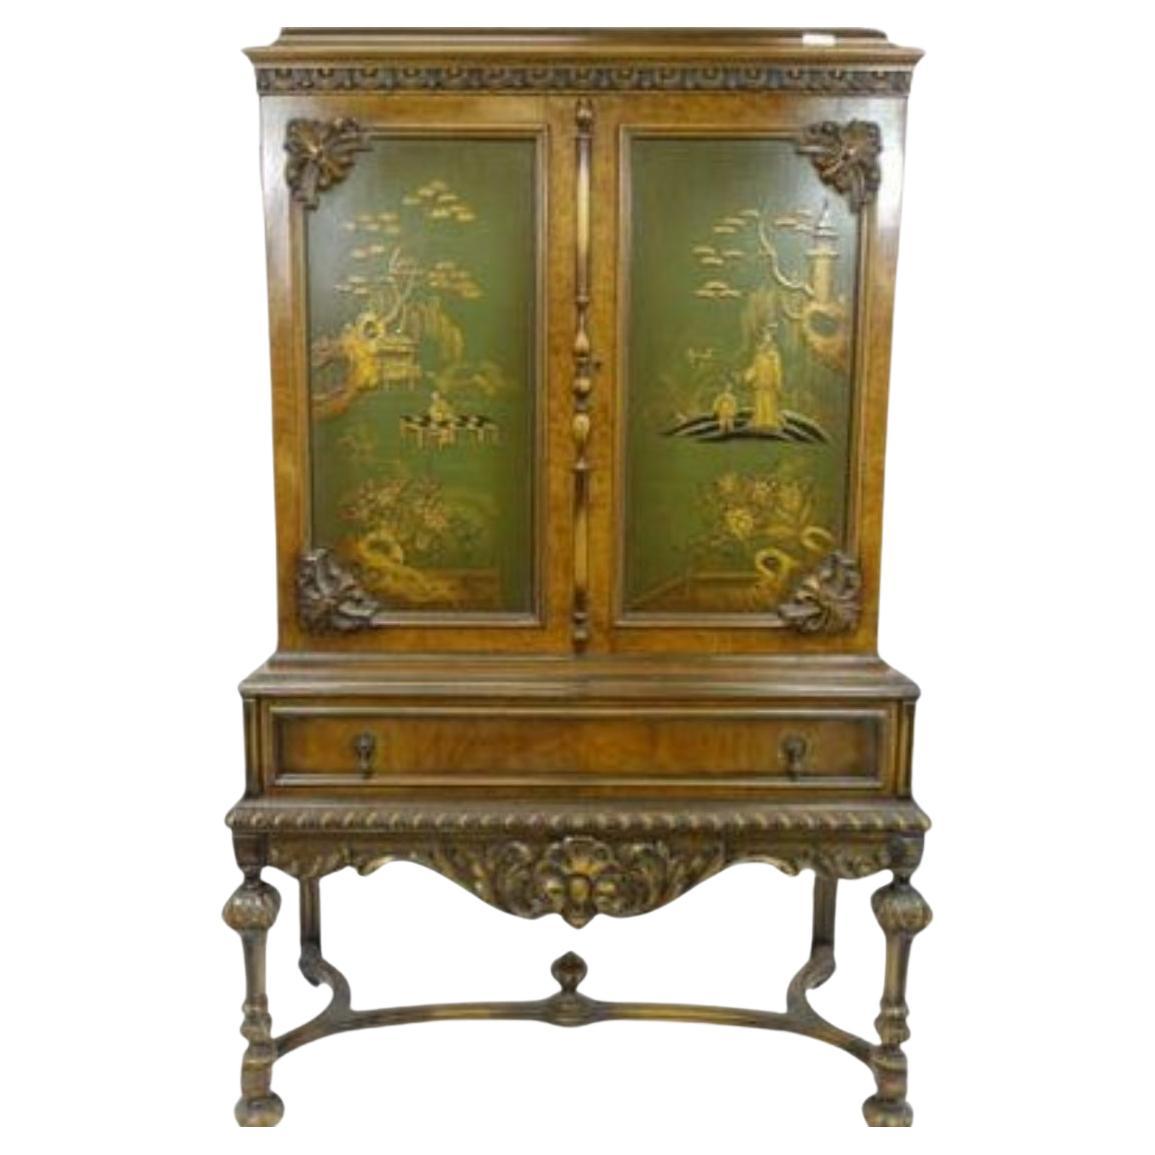 Beautiful Hand-Painted Oriental Design Cabinet With Elaborate Woodwork For Sale